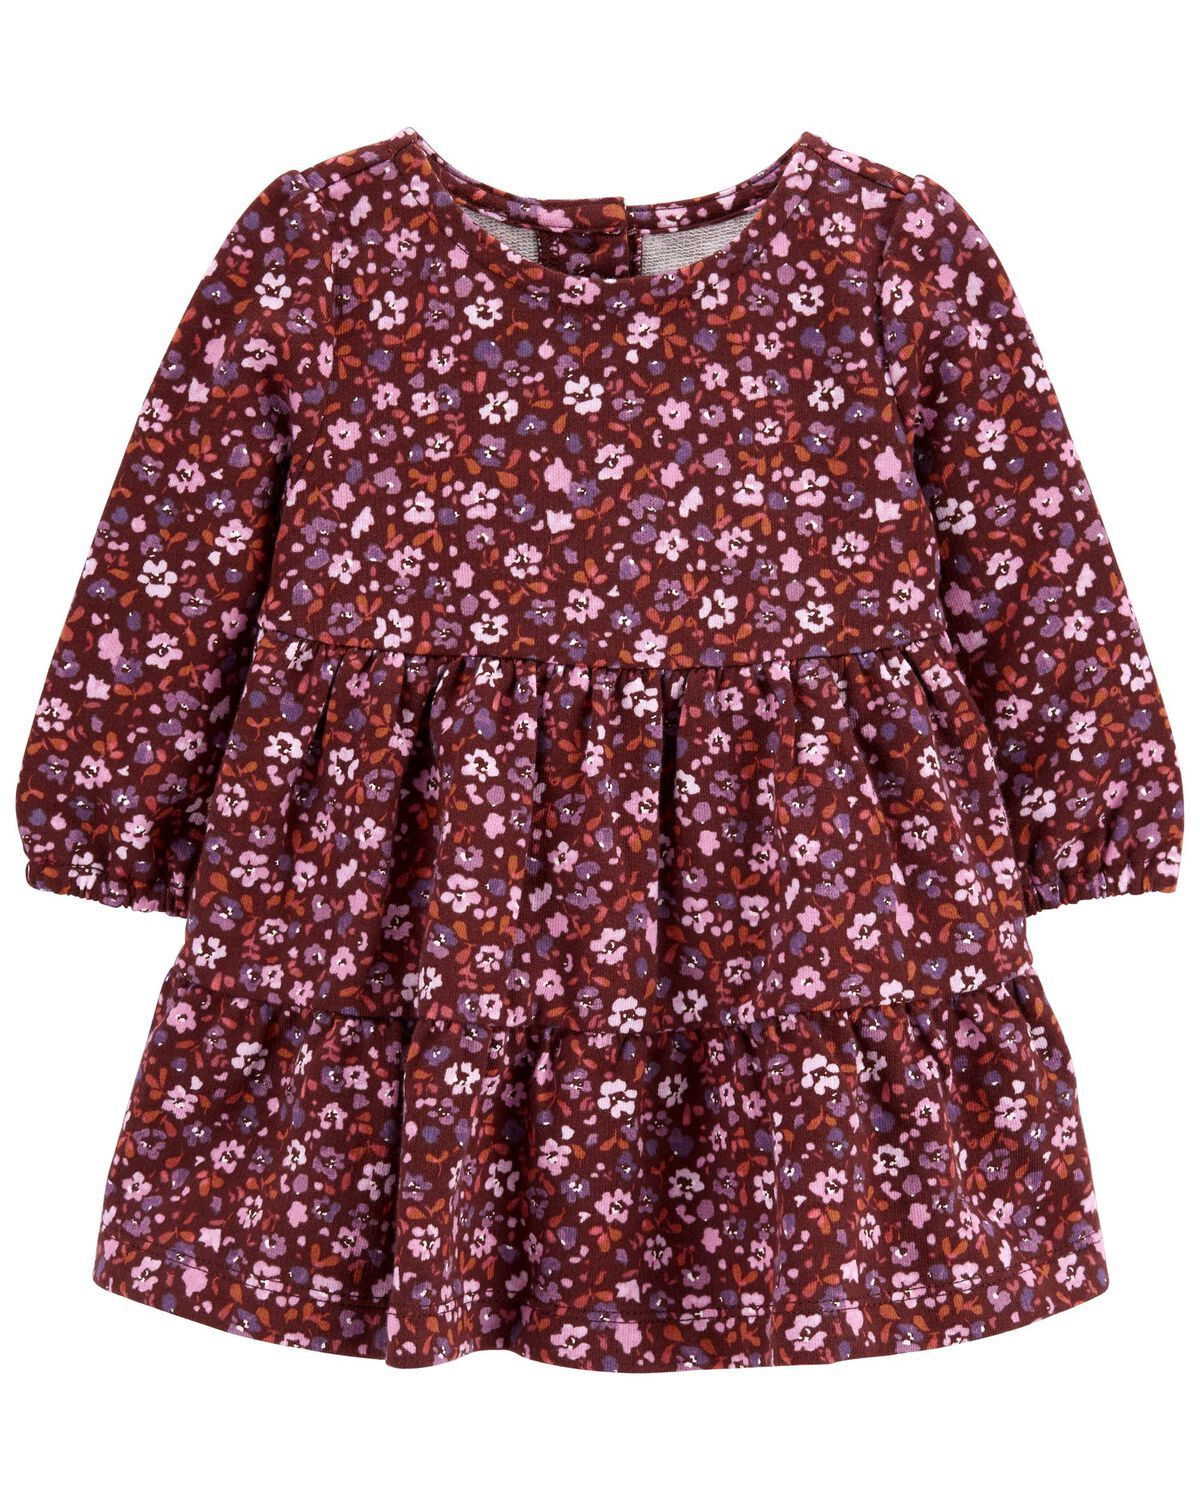 Brown Baby Floral Tiered Dress | carters.com | Carter's